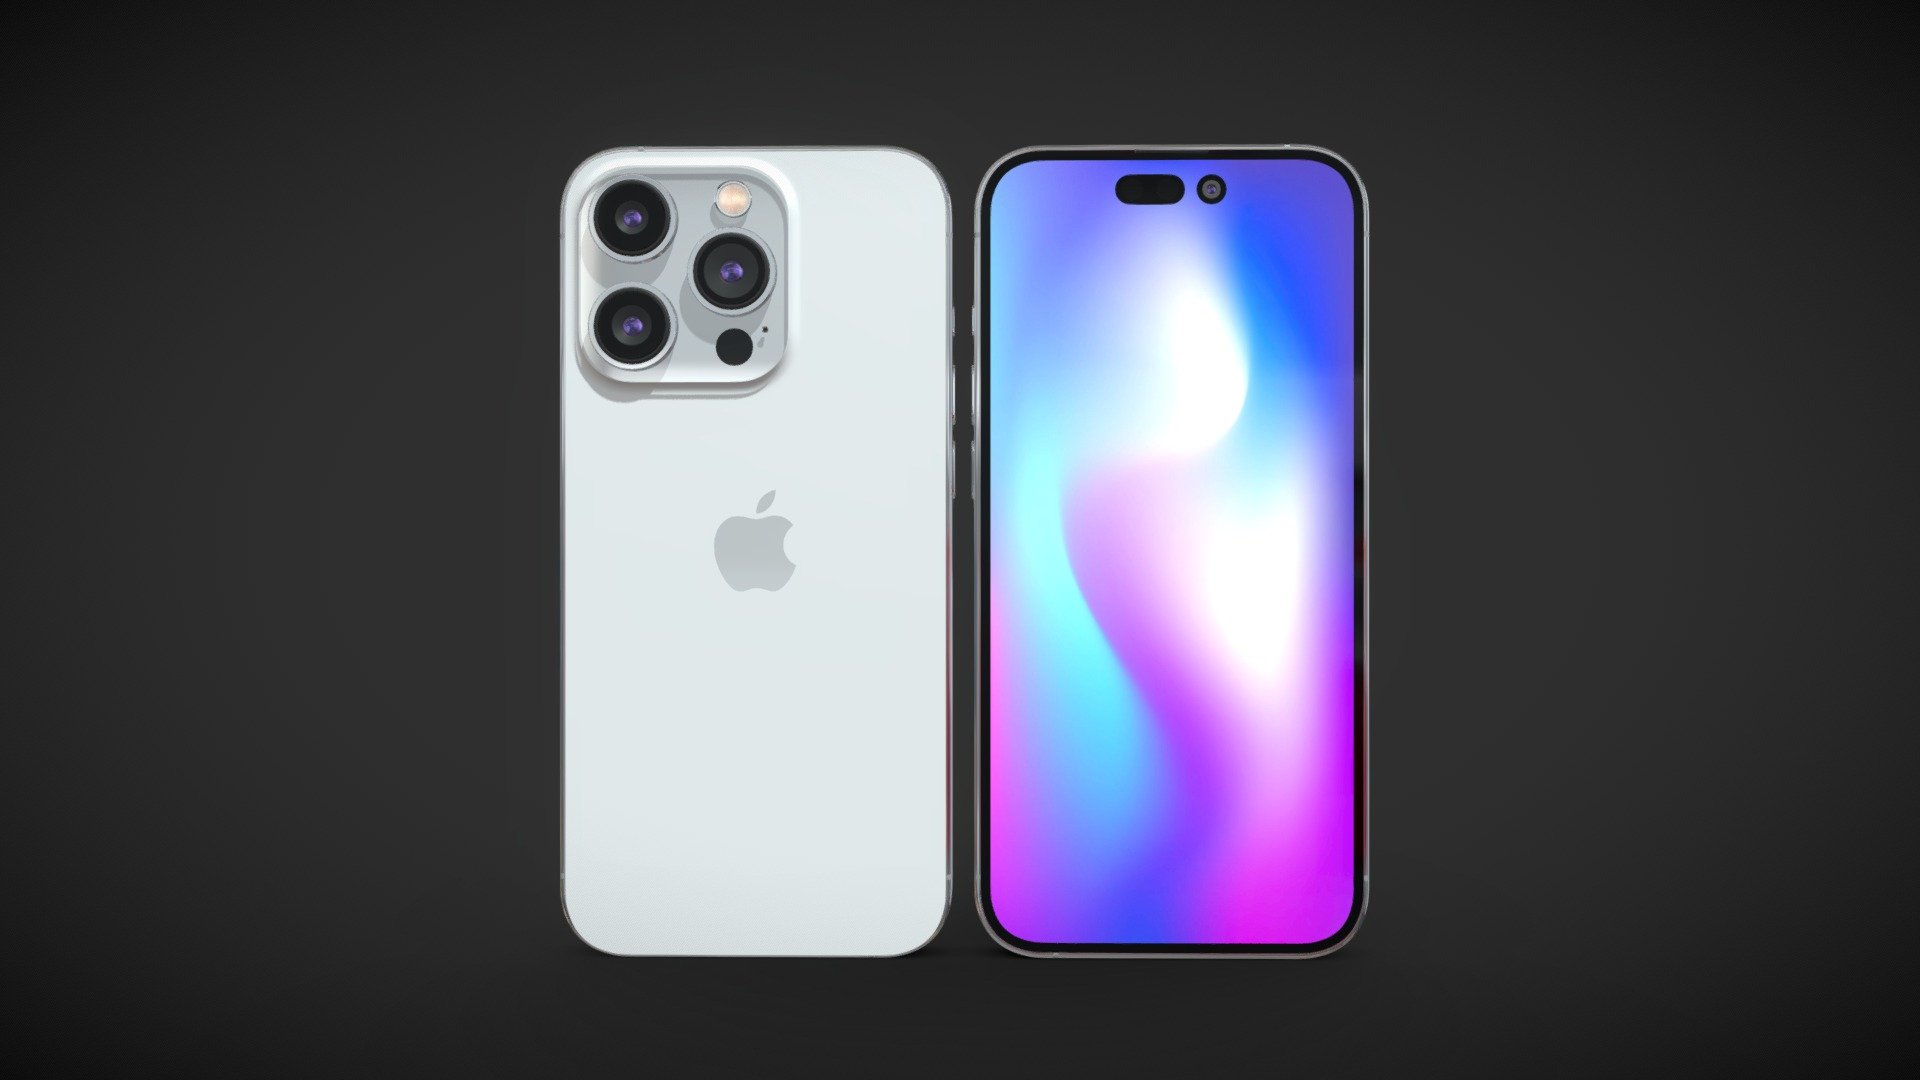 Realistic (copy) 3d model Apple iPhone 14 Pro v1.

This set:


1 file obj standard
1 file 3ds Max 2013 vray material
1 file 3ds Max 2013 corona material
1 file of 3Ds
1 file e3d full set of materials.
1 file cinema 4d standard.
1 file blender cycles.
1 file STL

Topology of geometry:
- forms and proportions of The 3D model
- the geometry of the model was created very neatly
- there are no many-sided polygons
- detailed enough for close-up renders
- the model optimized for turbosmooth modifier
- Not collapsed the turbosmooth modified
- apply the Smooth modifier with a parameter to get the desired level of detail

Organization of scene:
- to all objects and materials
- real world size (system units - mm)
- coordinates of location of the model in space (x0, y0, z0)
- does not contain extraneous or hidden objects (lights, cameras, shapes etc.) - Apple iPhone 14 Pro v1 - Buy Royalty Free 3D model by madMIX 3d model